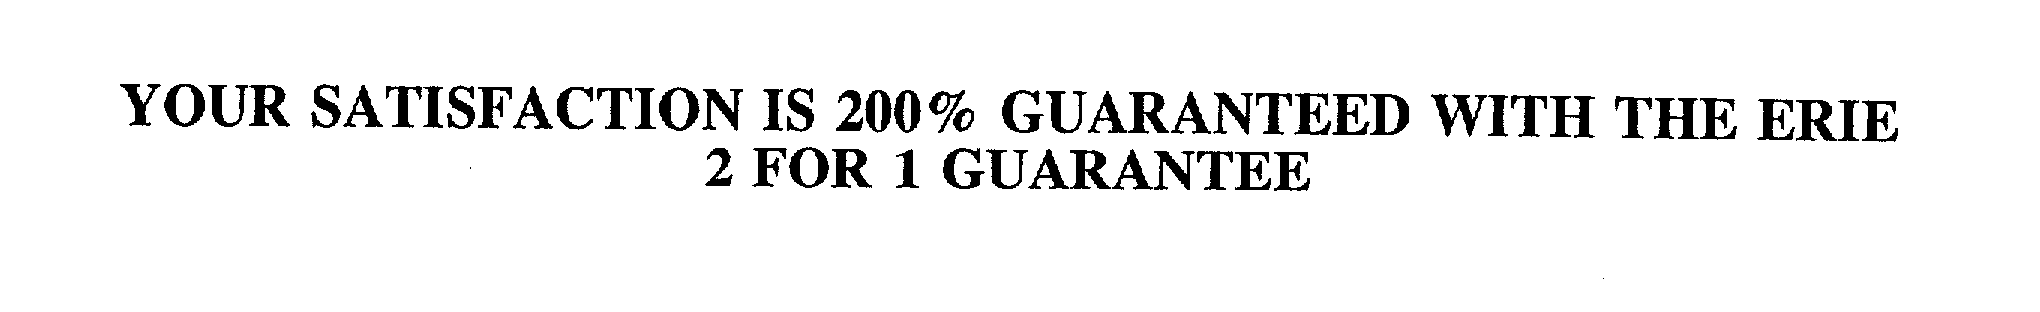  YOUR SATISFACTION IS 200% GUARANTEED WITH THE ERIE 2 FOR 1 GUARANTEE